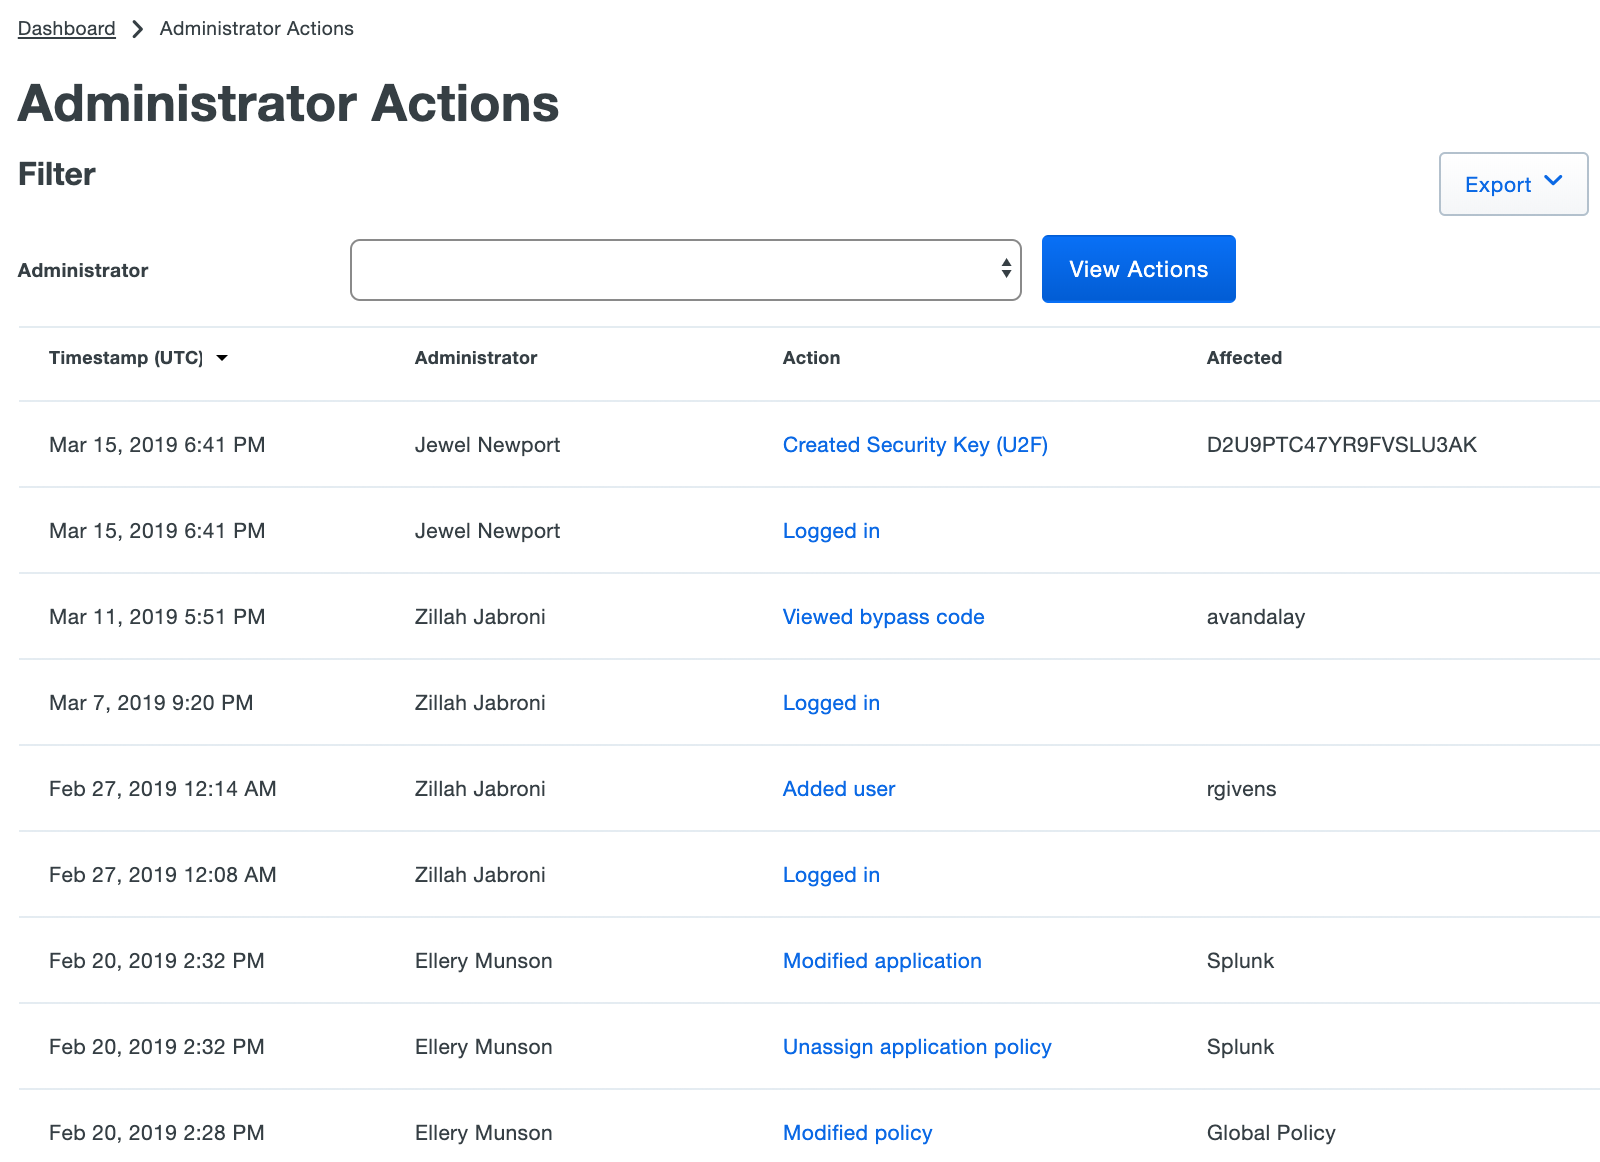 Administrator Actions Log